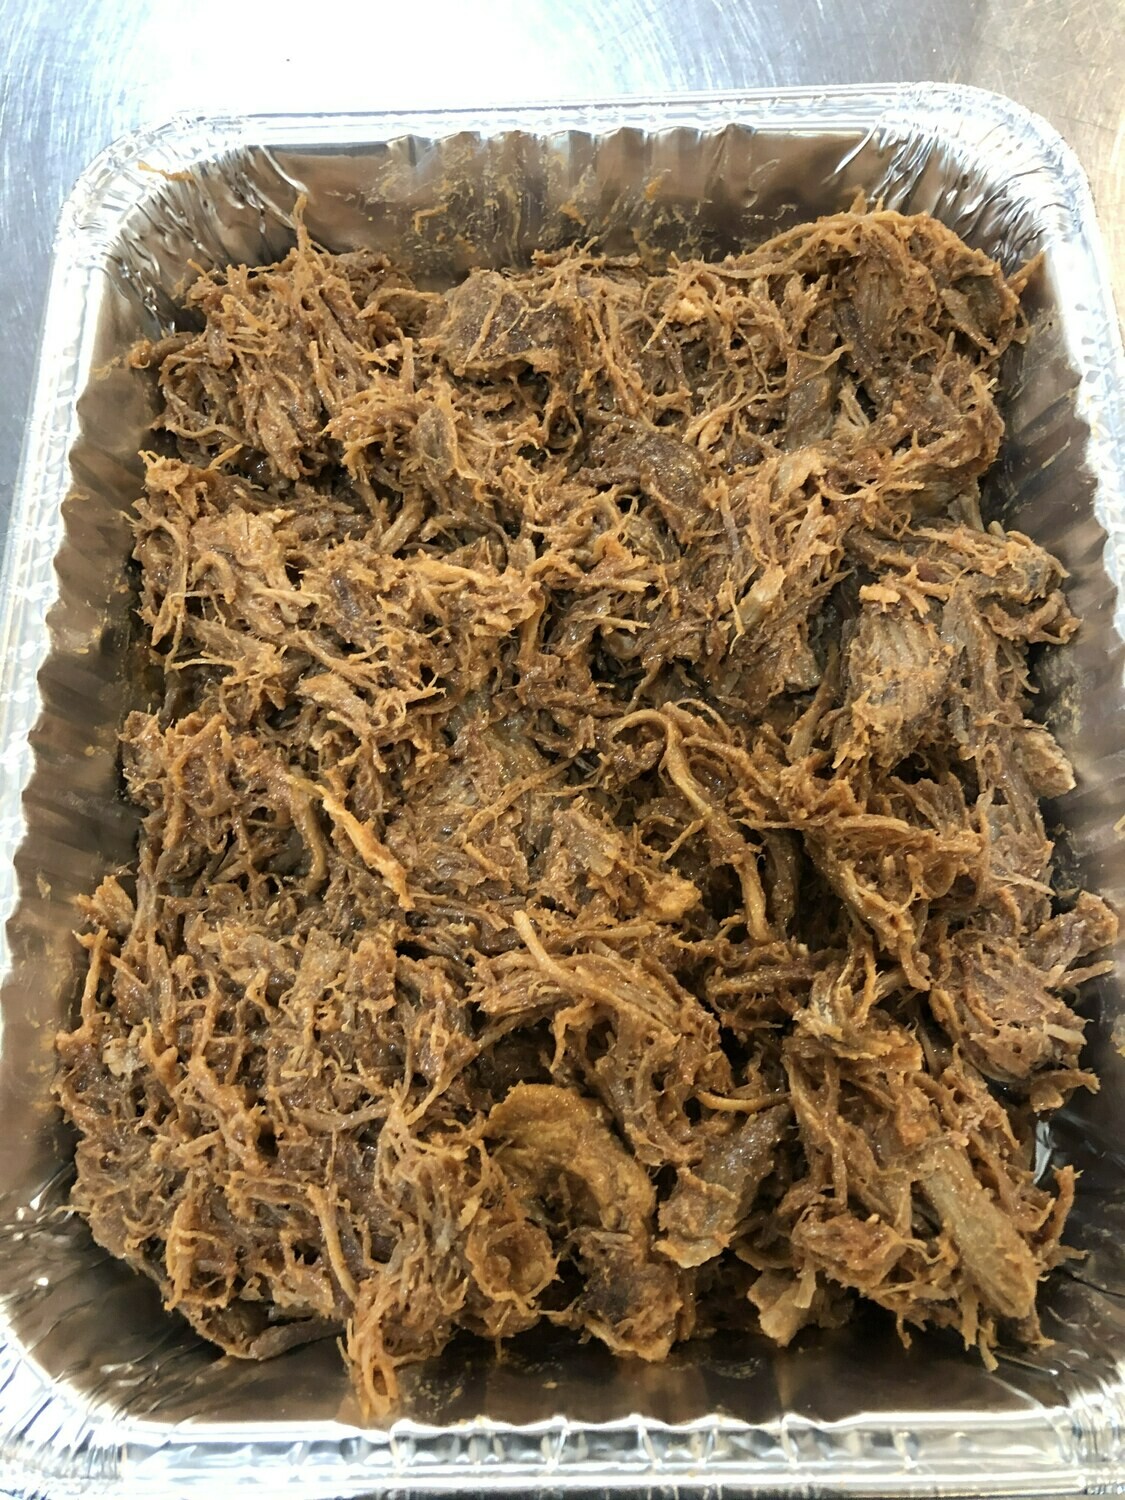 House Smoked Pulled Pork with Slider Buns 4-6 Servings